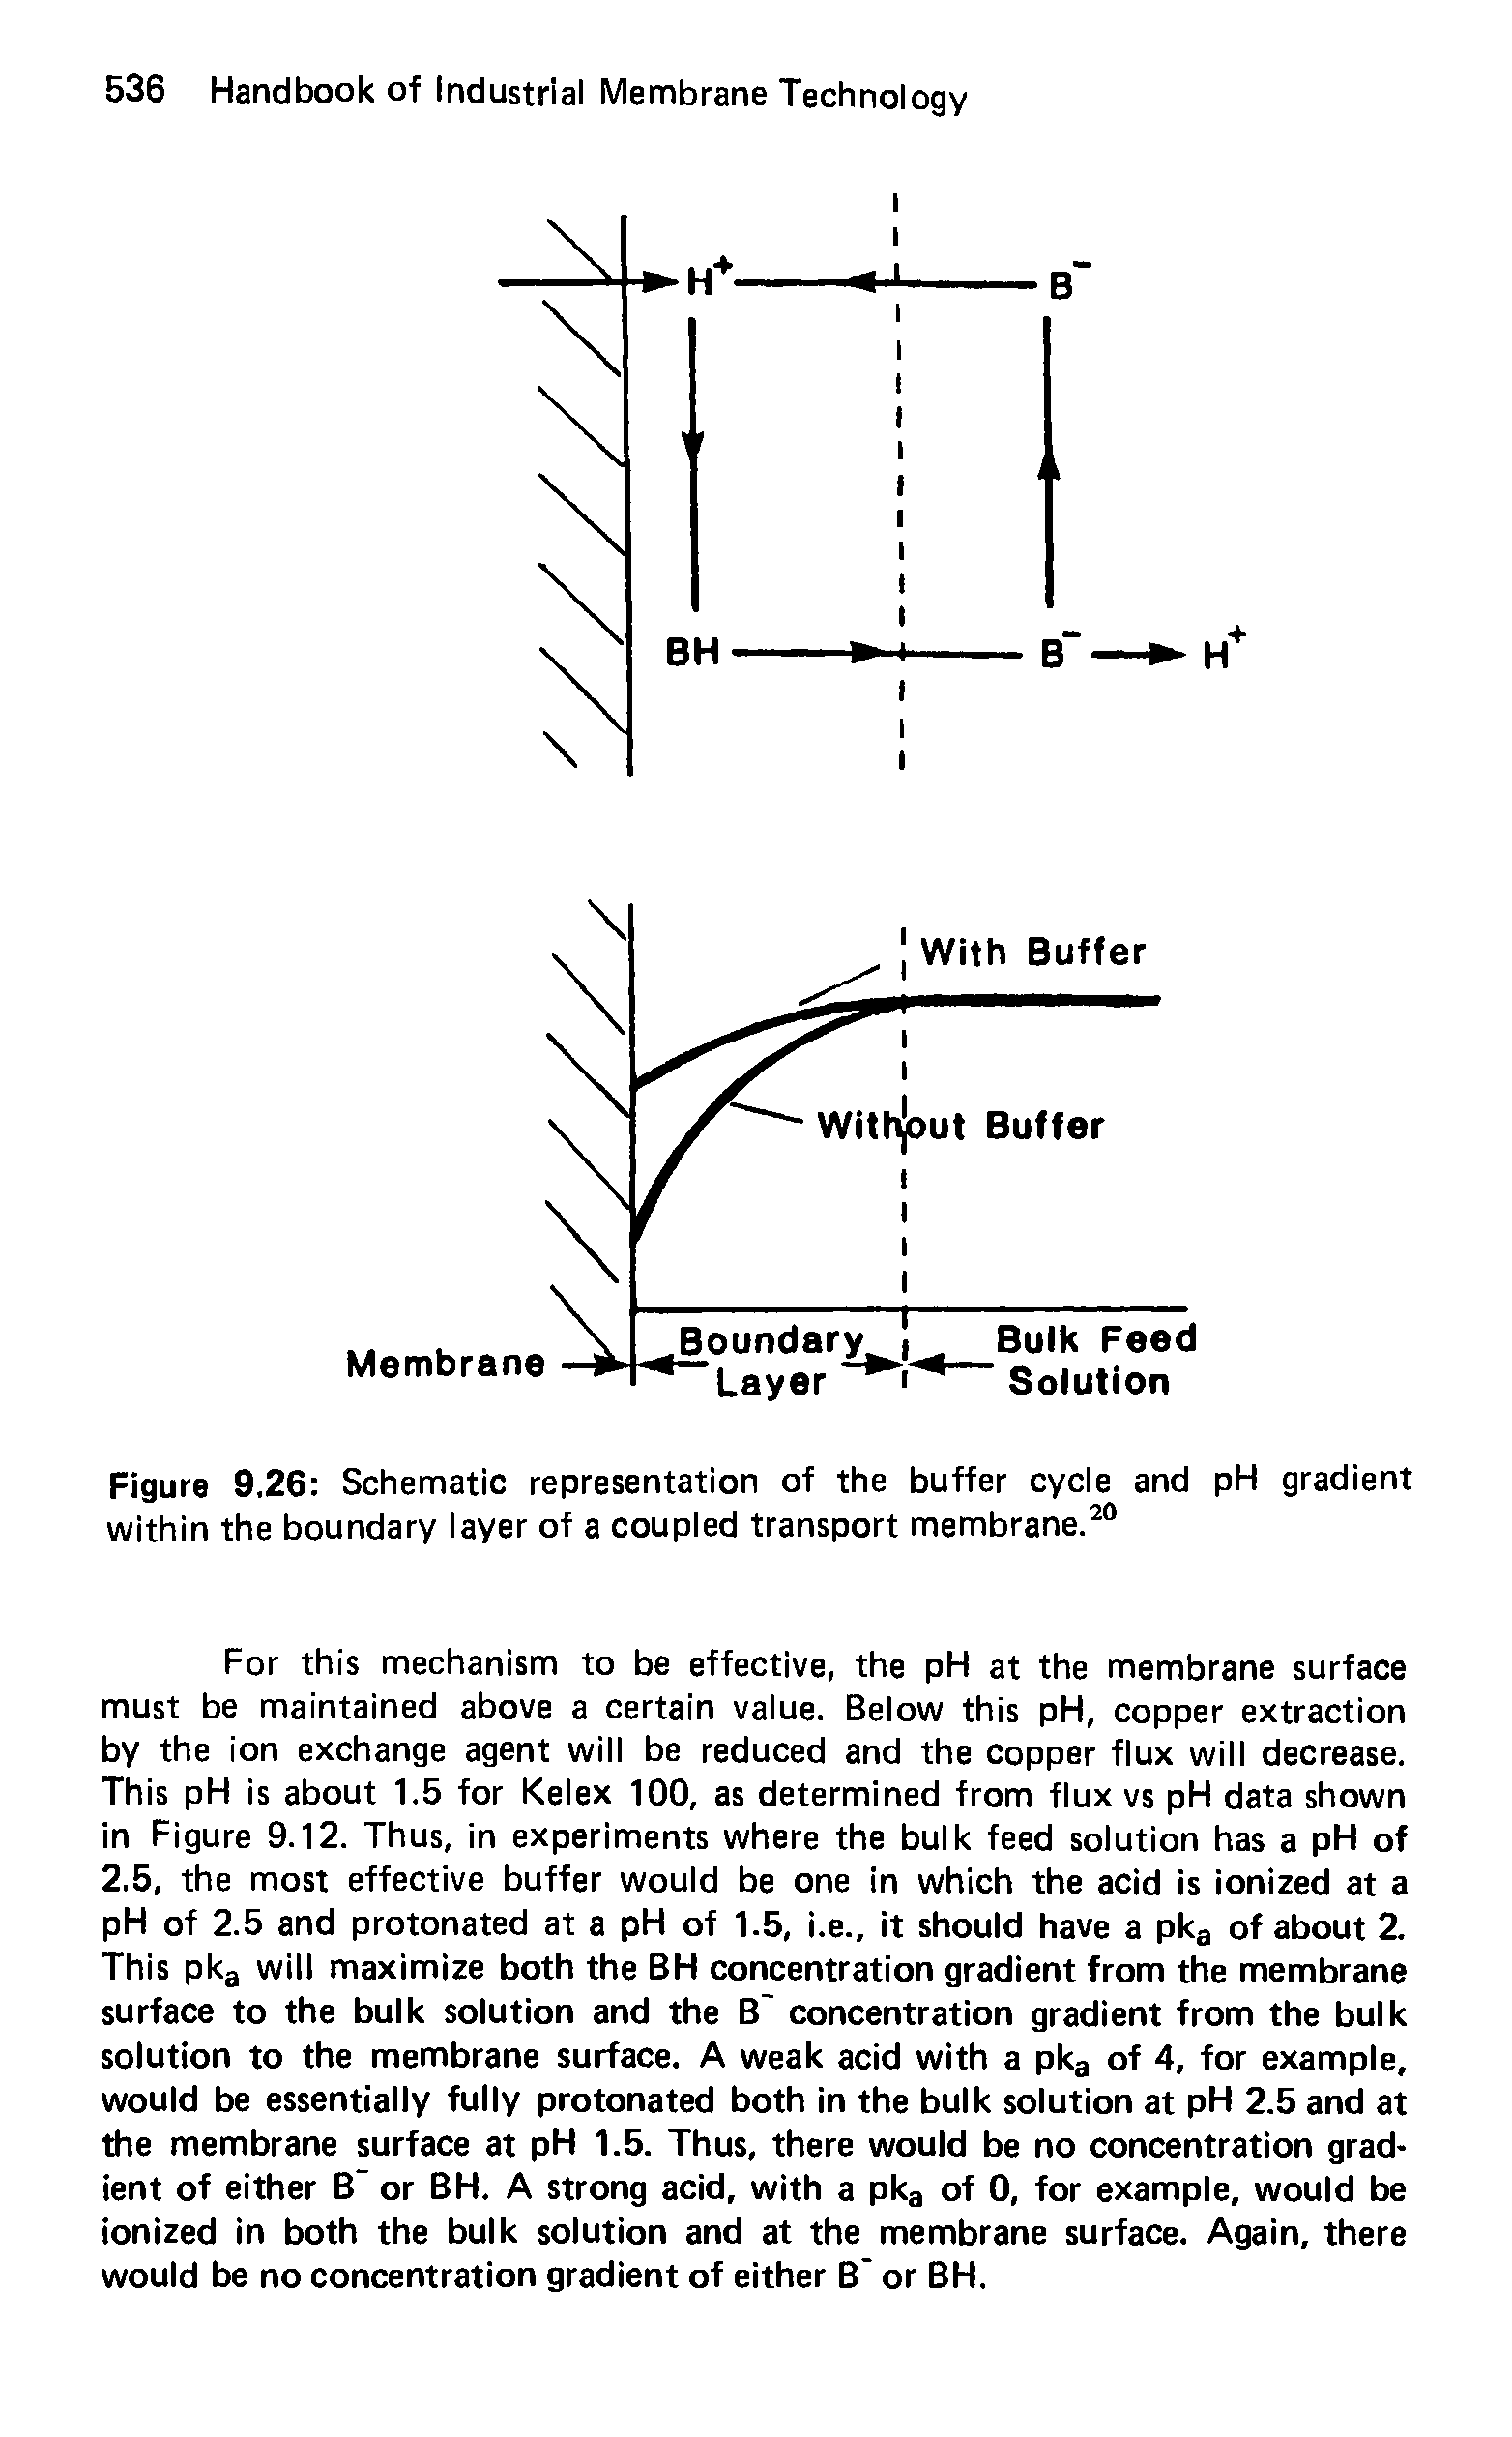 Figure 9,26 Schematic representation of the buffer cycle and pH gradient within the boundary layer of a coupled transport membrane.20...